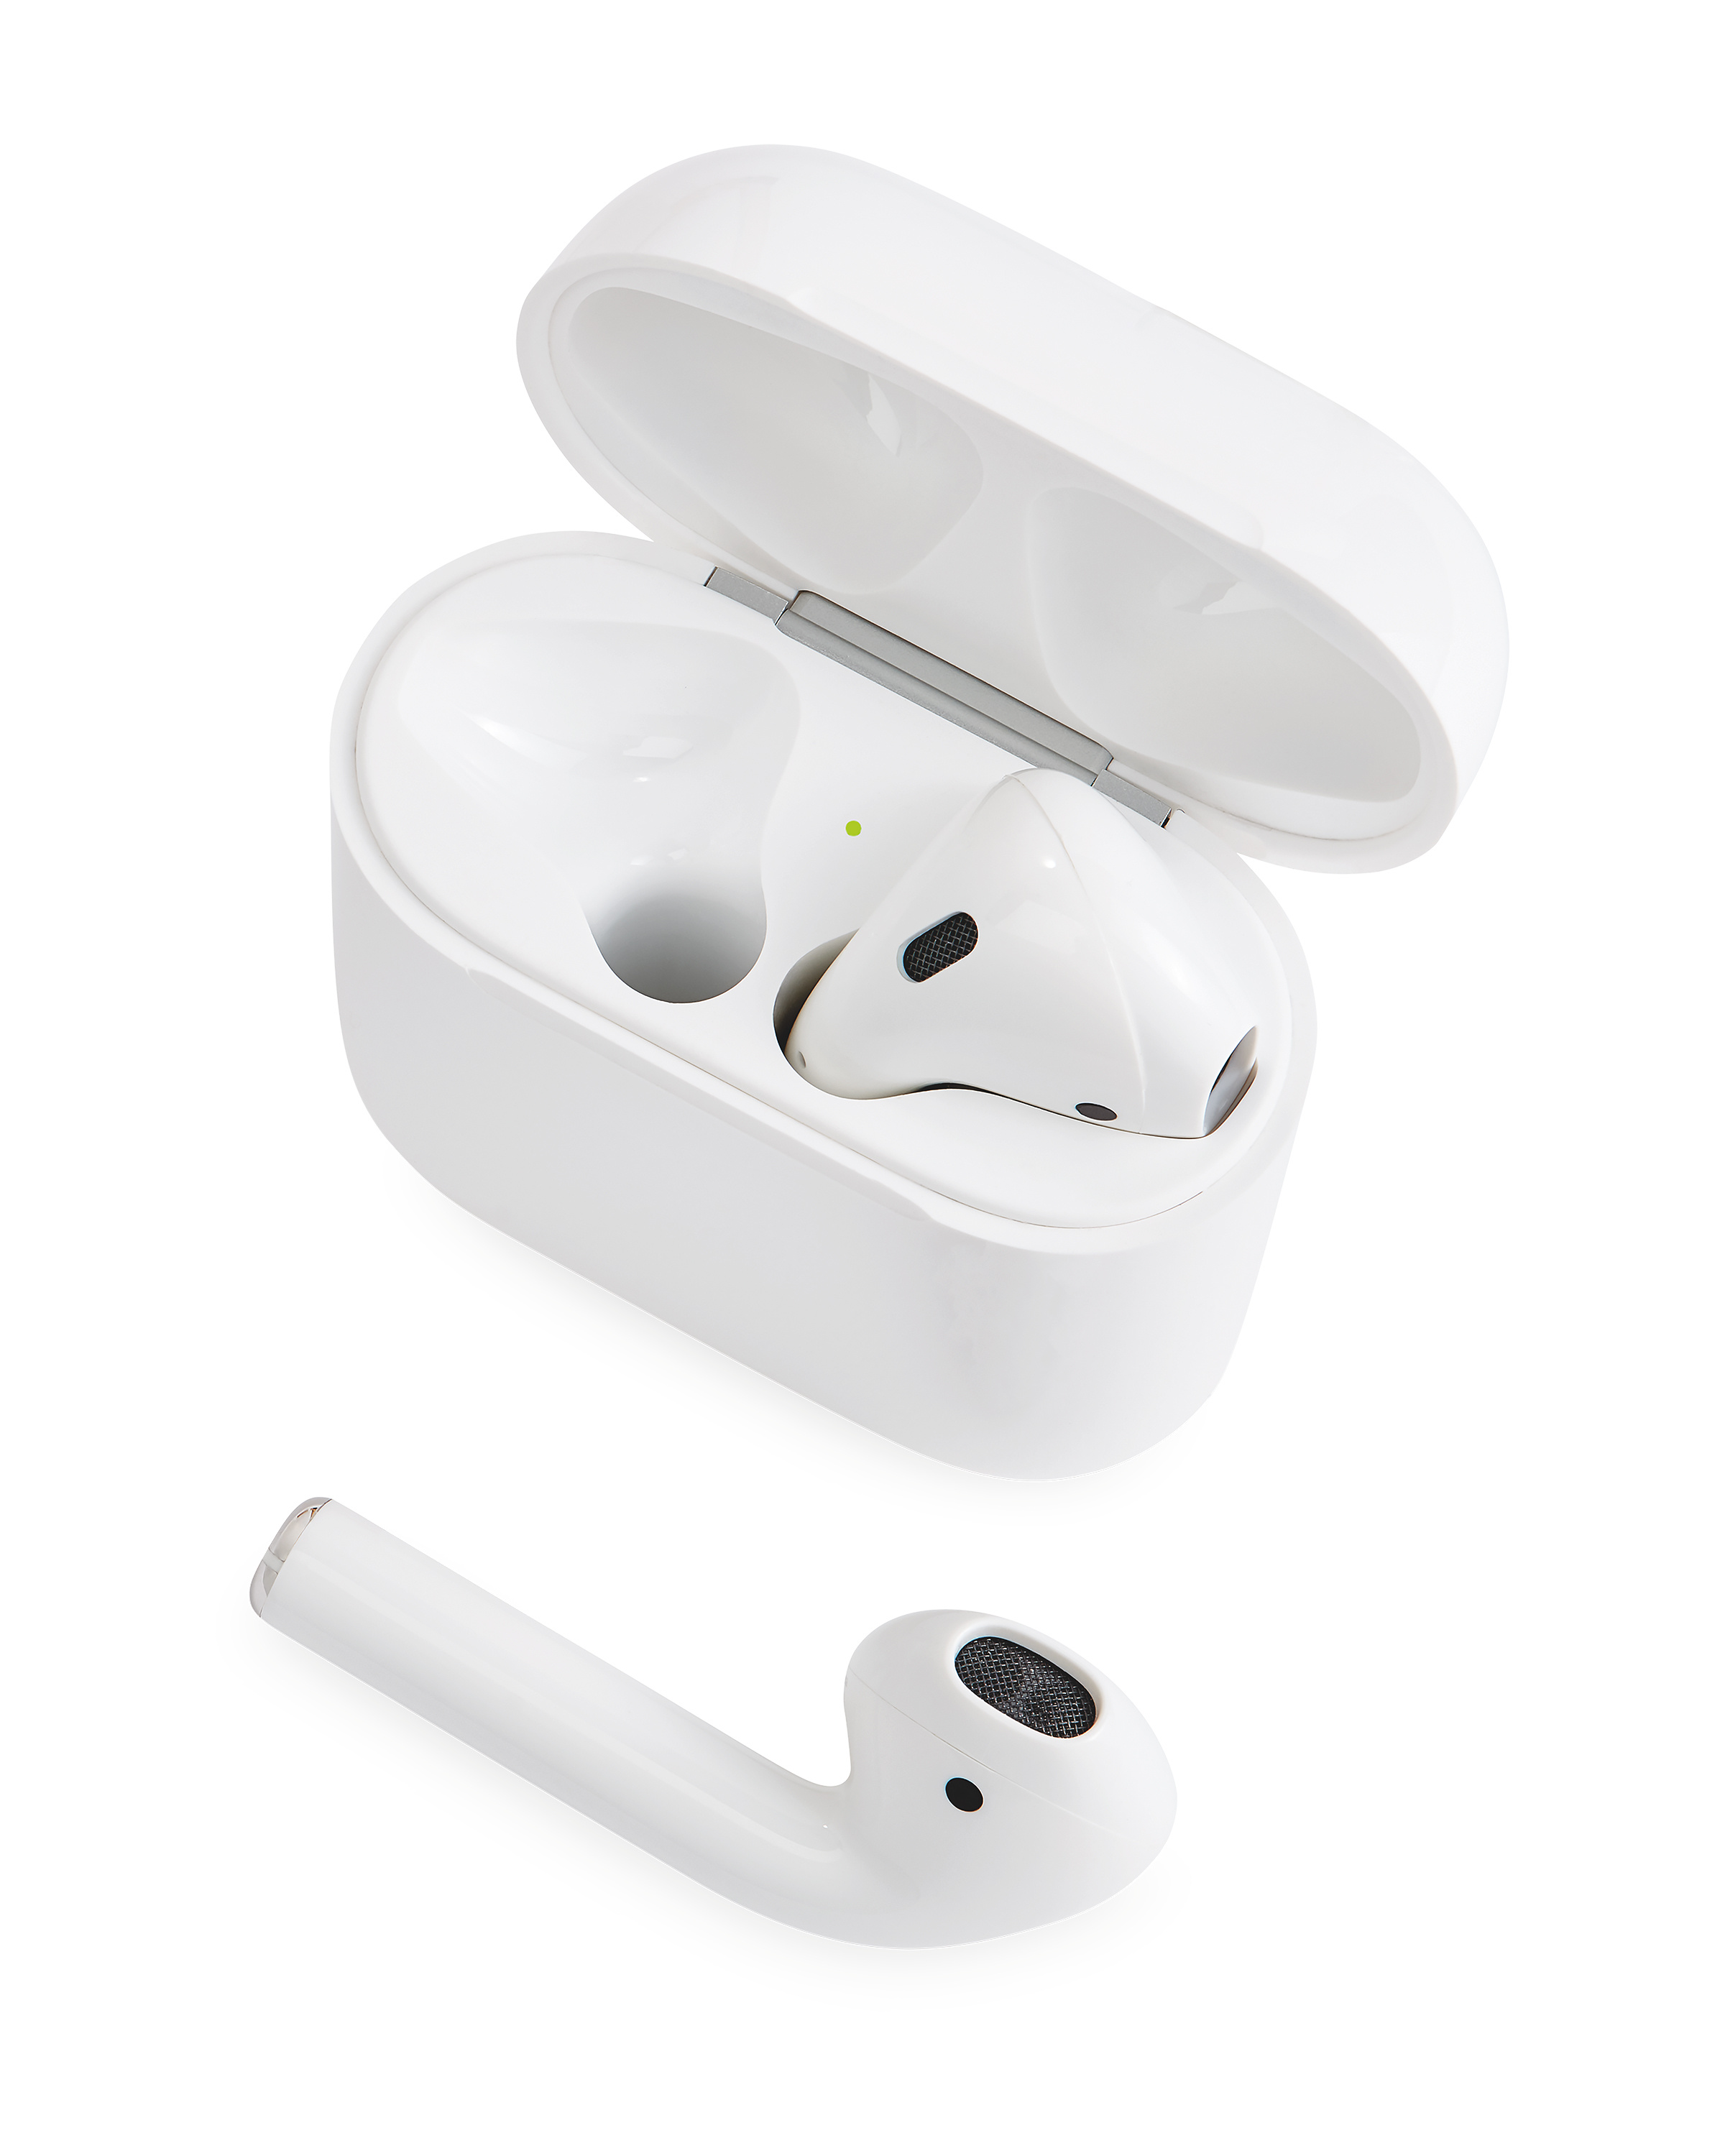 Generation airpods 2nd Sanctions Policy